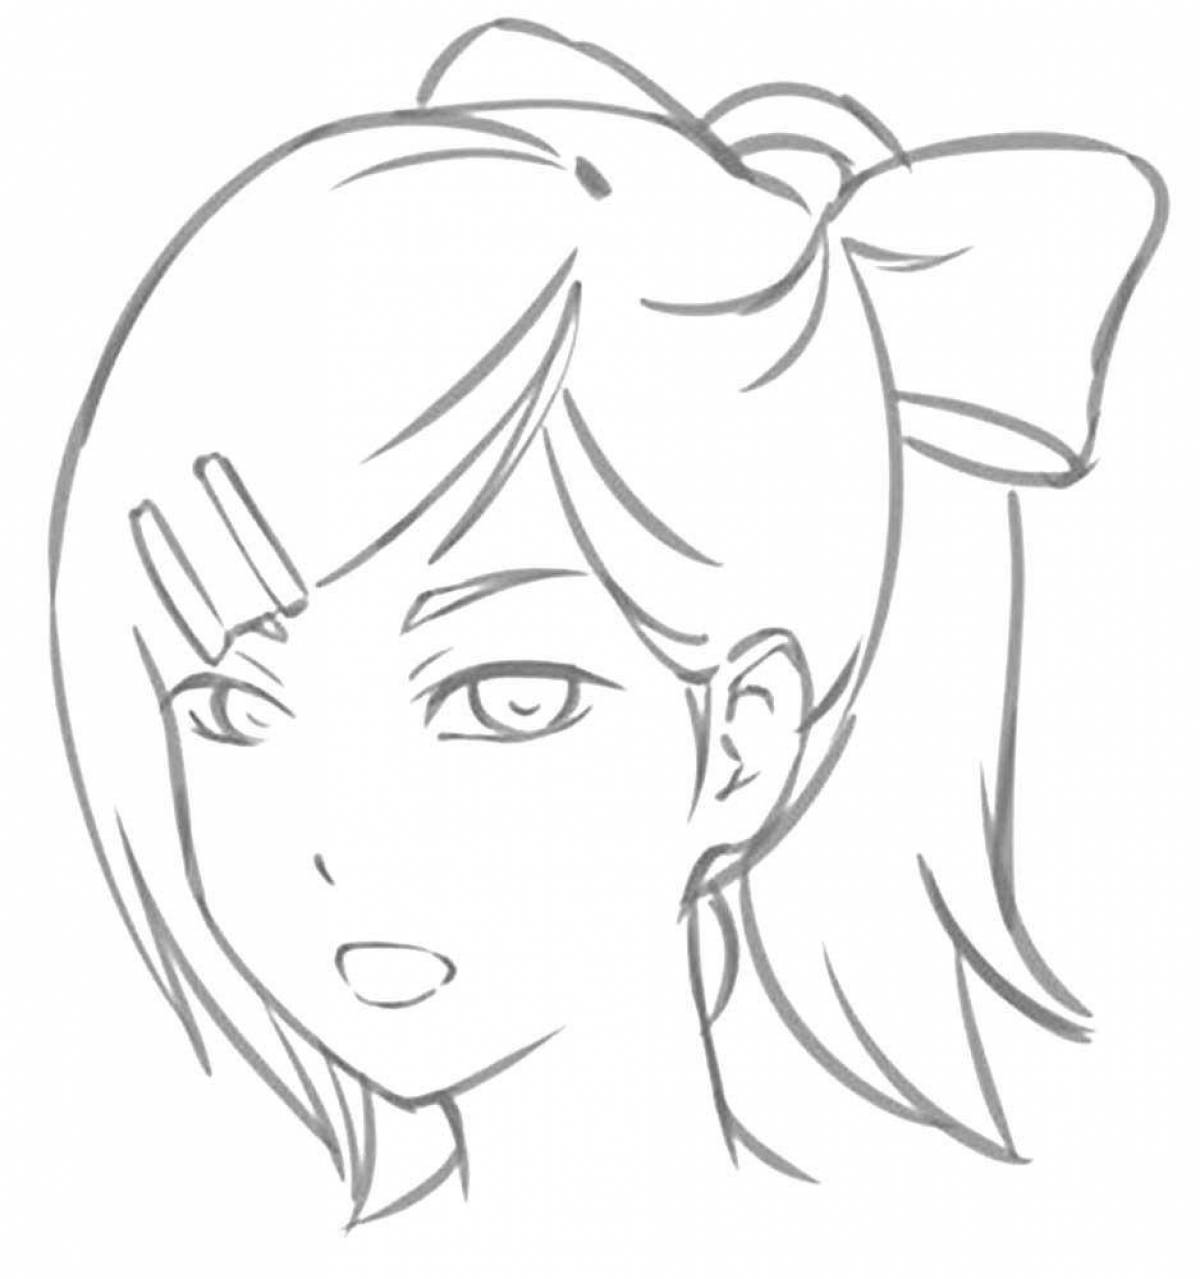 Coloring page of shining anime face